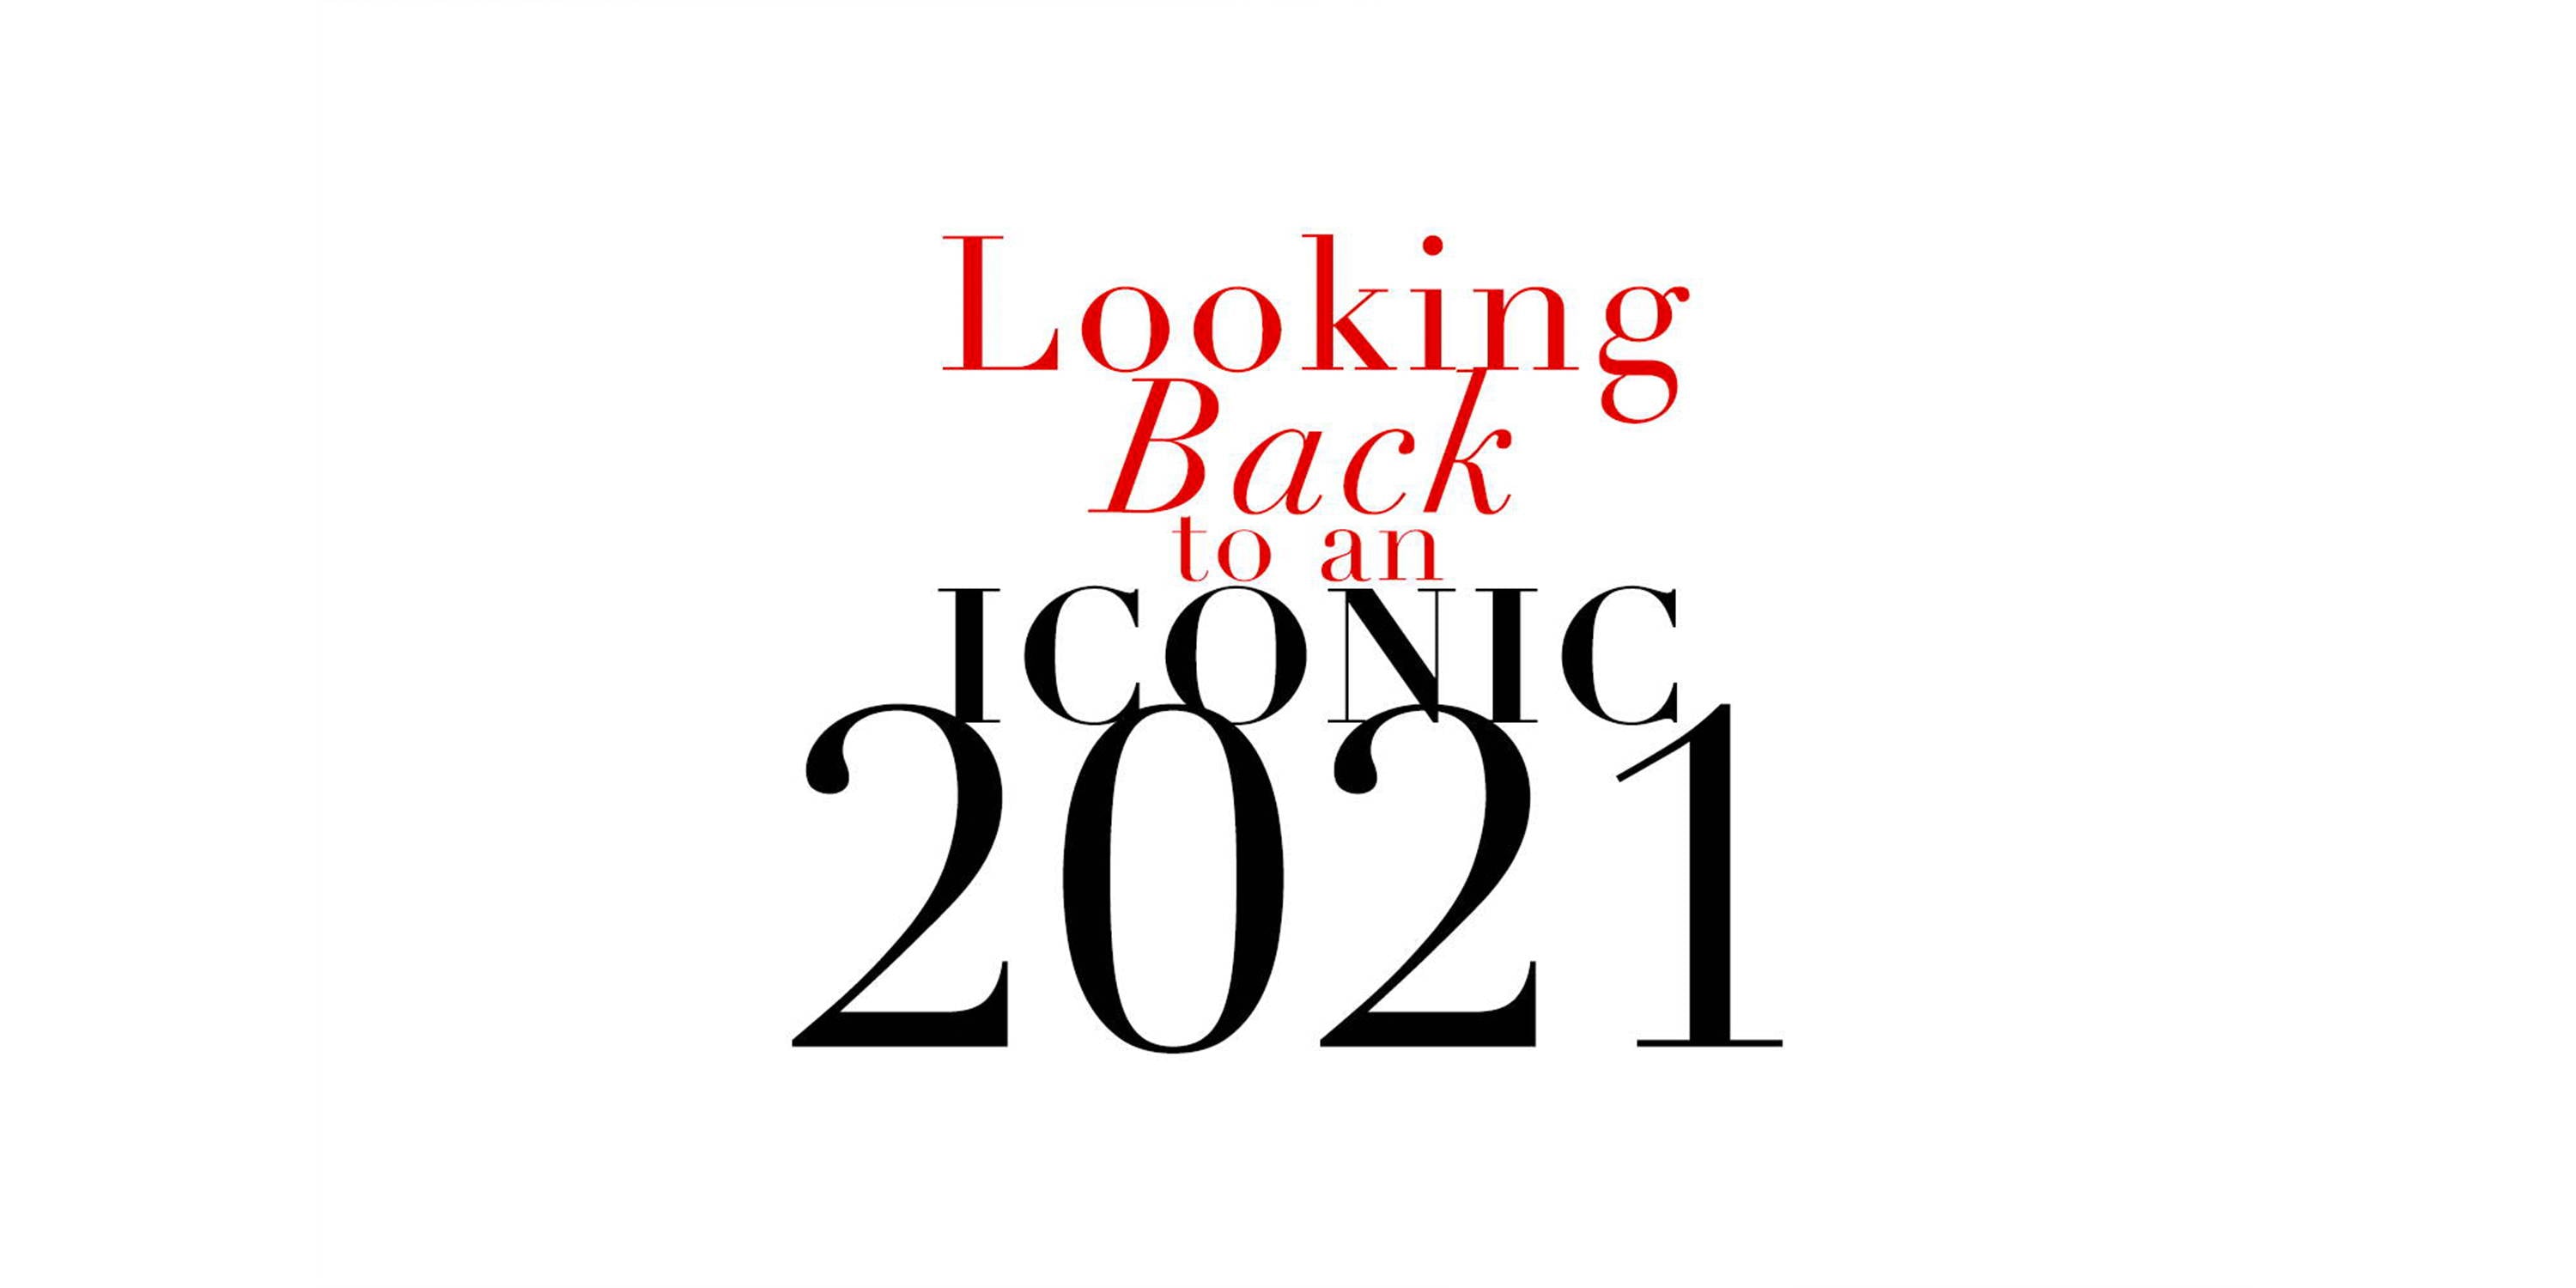 Looking Back to an Iconic 2021